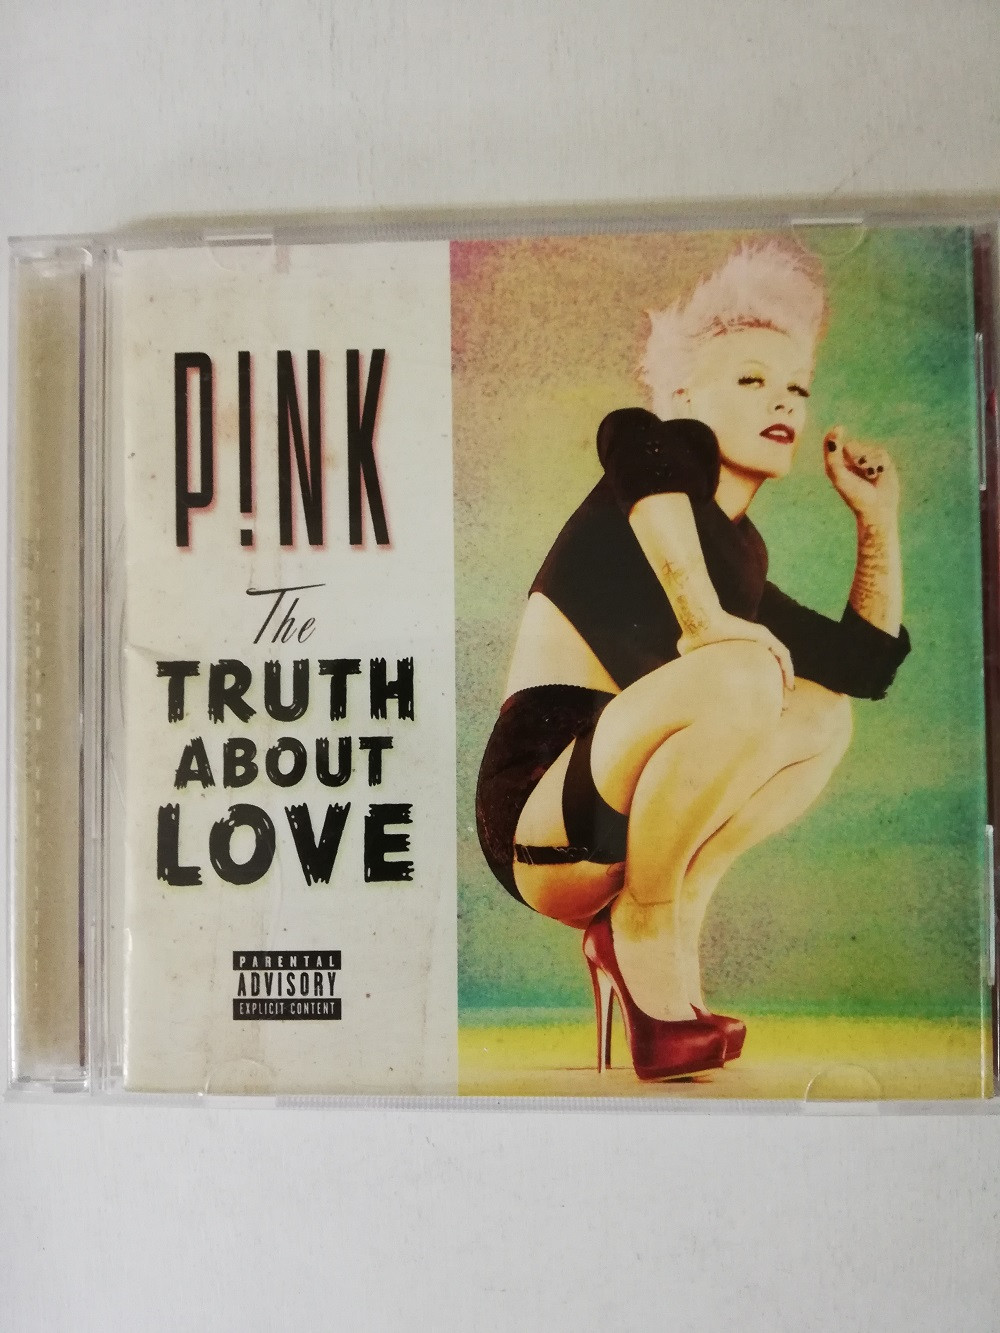 Imagen CD PINK - THE TRUTH ABOUT LOVE